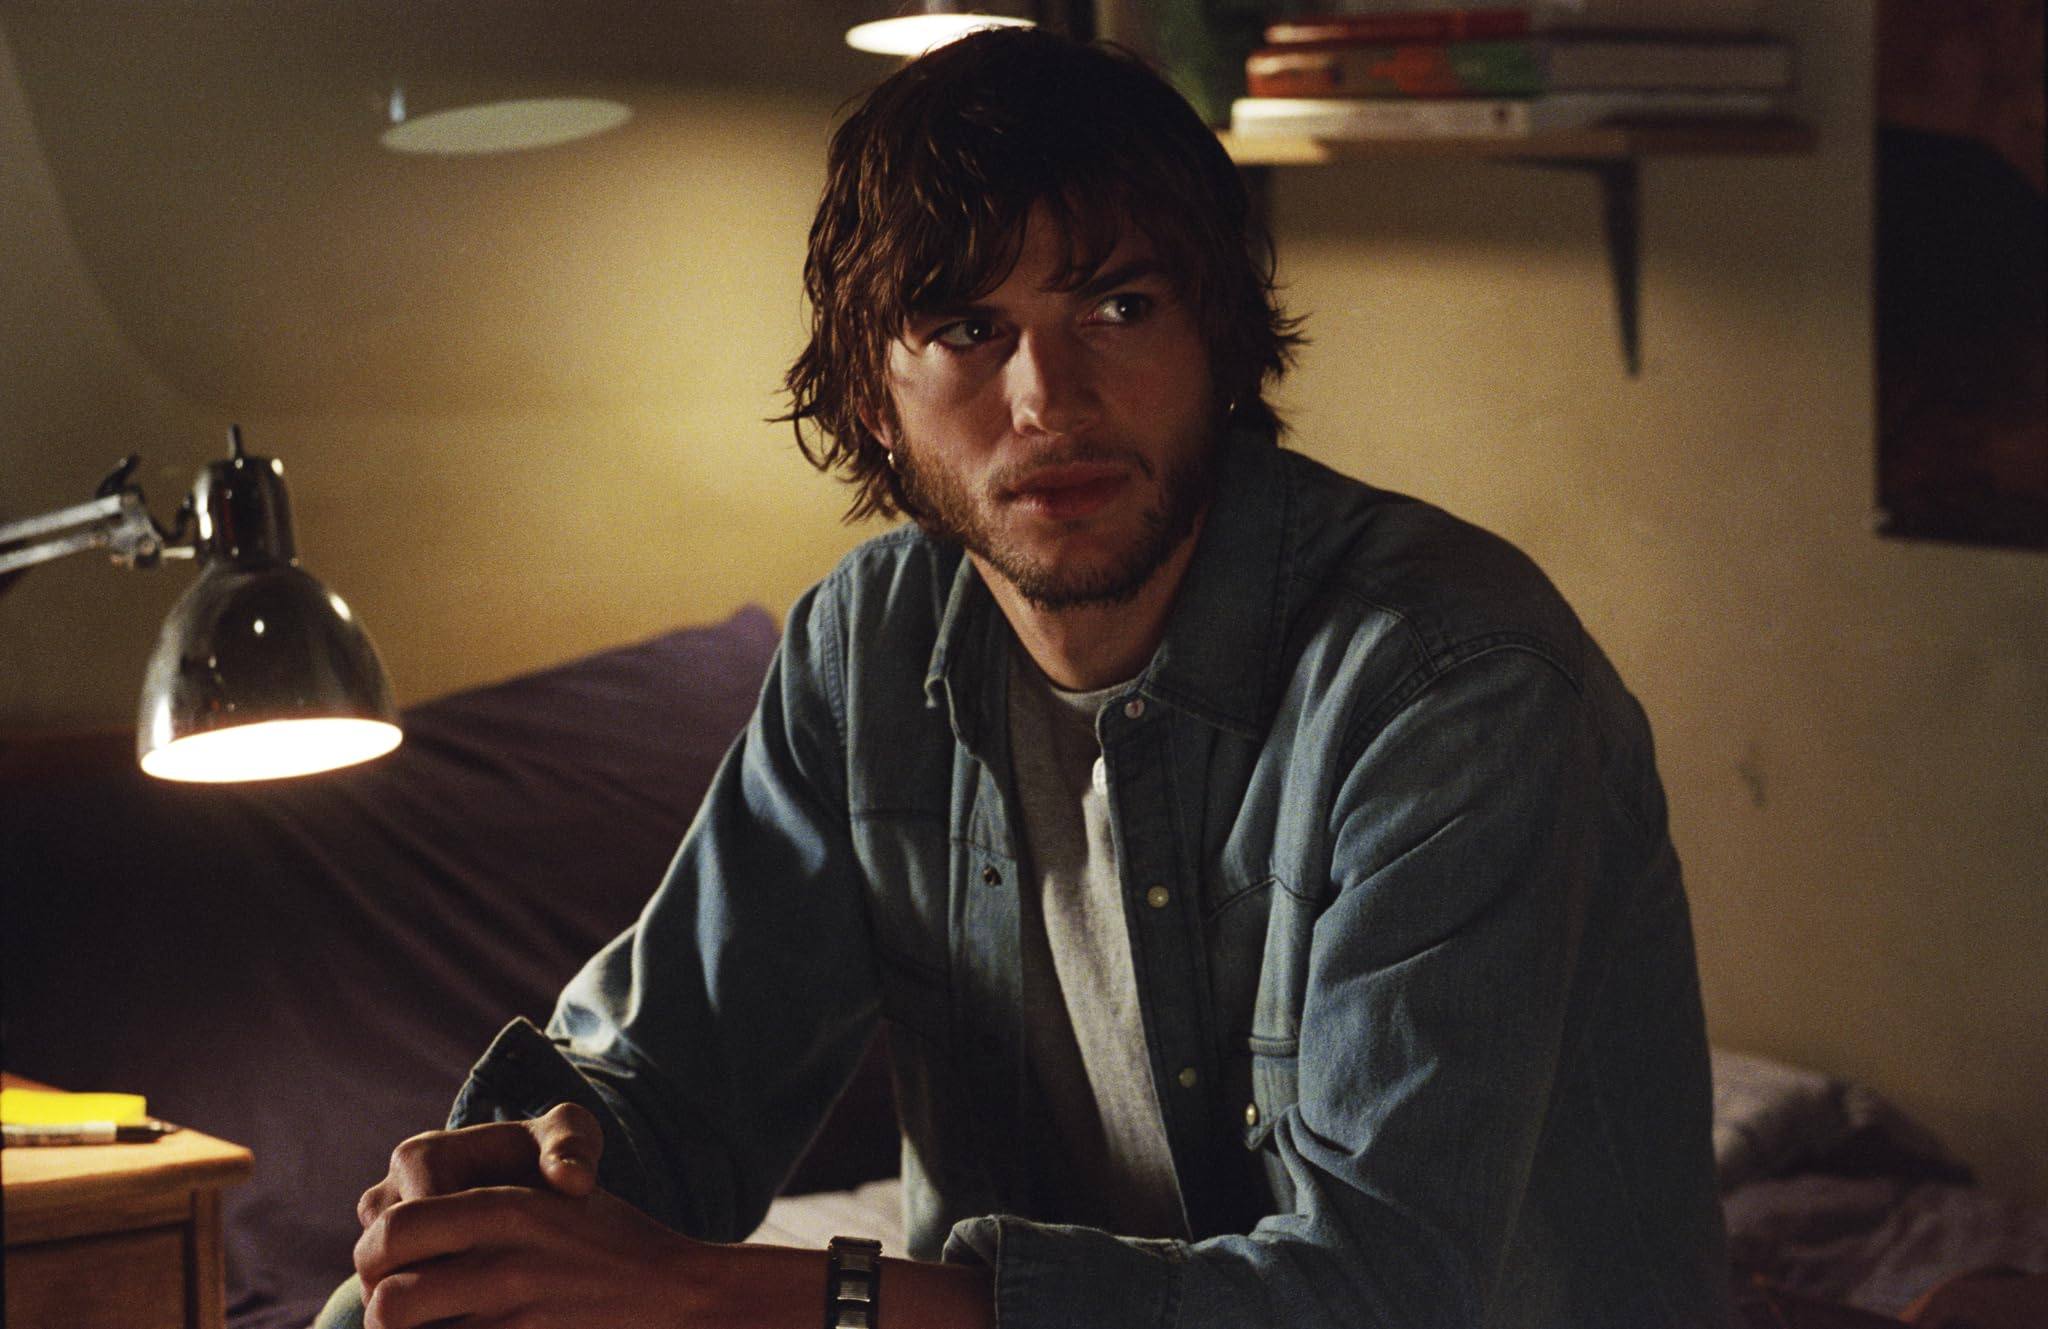 Calling it a masterpiece might be a stretch but the 2004 time-travel thriller The Butterfly Effect – despite its chaotic plotline – filled a void left by a dearth of quality horror films. Above: Ashton Kutcher in a still from the film. Photo: New Line Cinema.